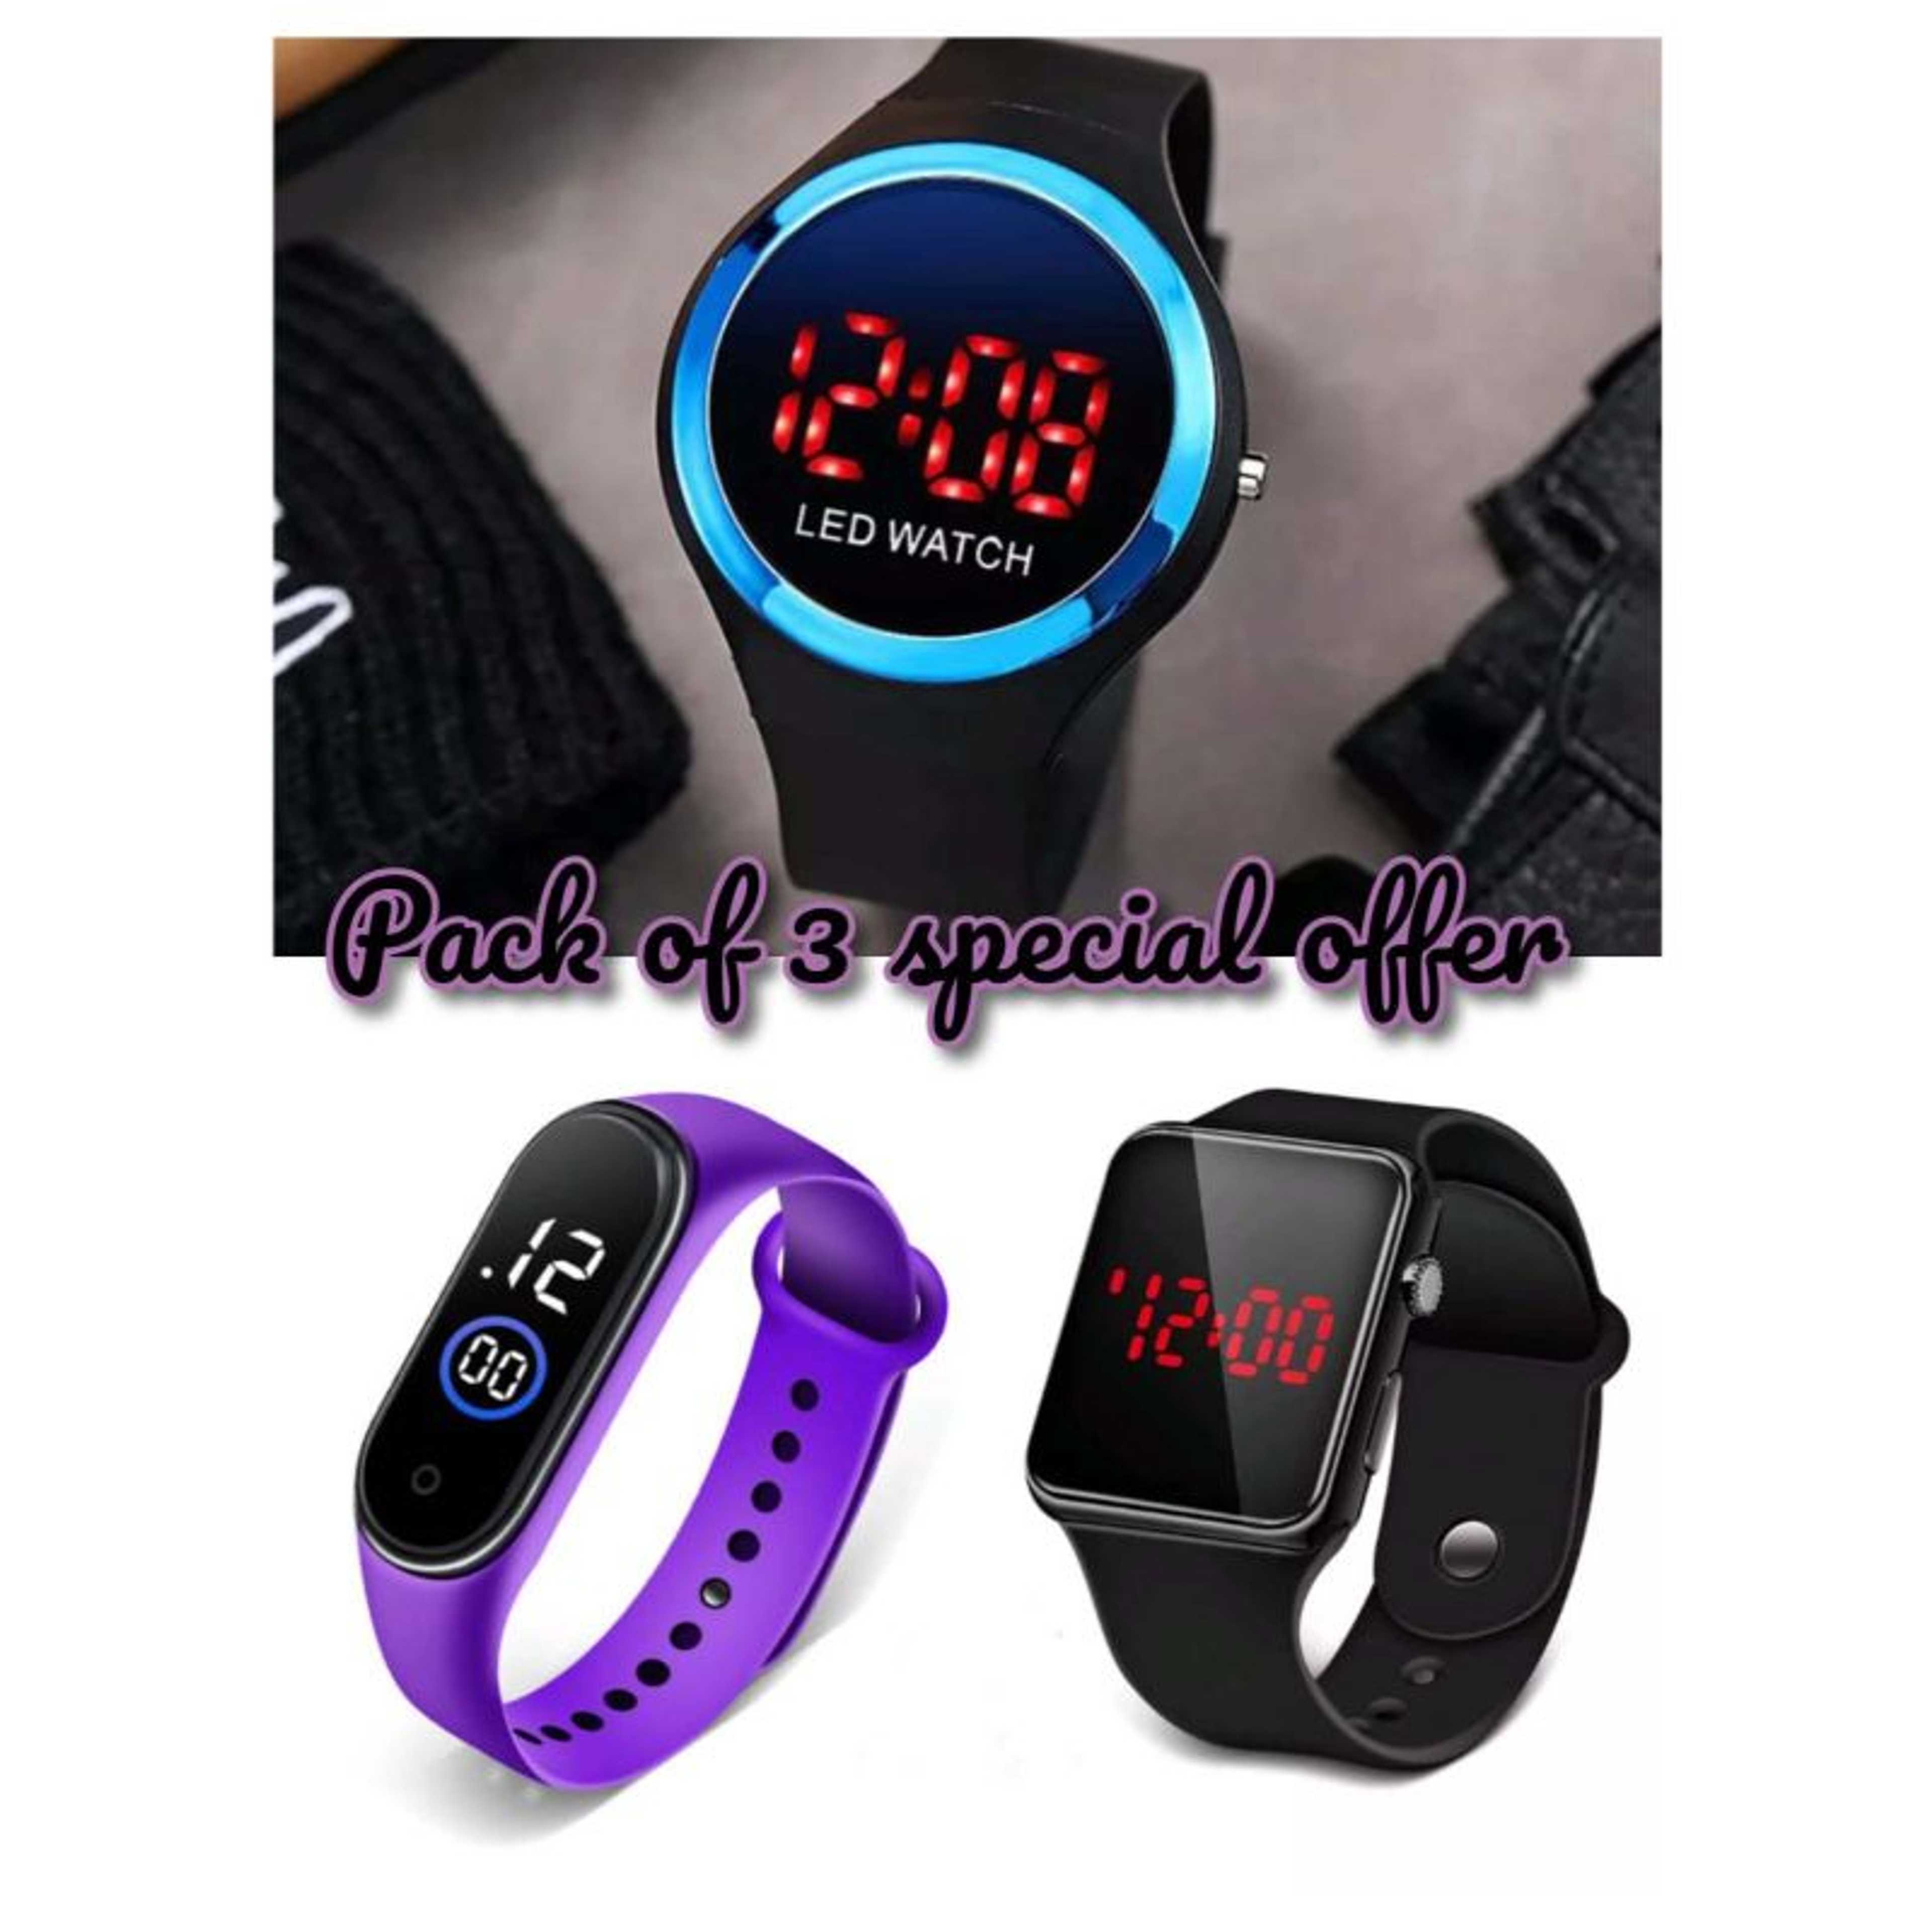 (PACK OF 3 ) Led Watches For Boys and Girls Premium Quality Watches